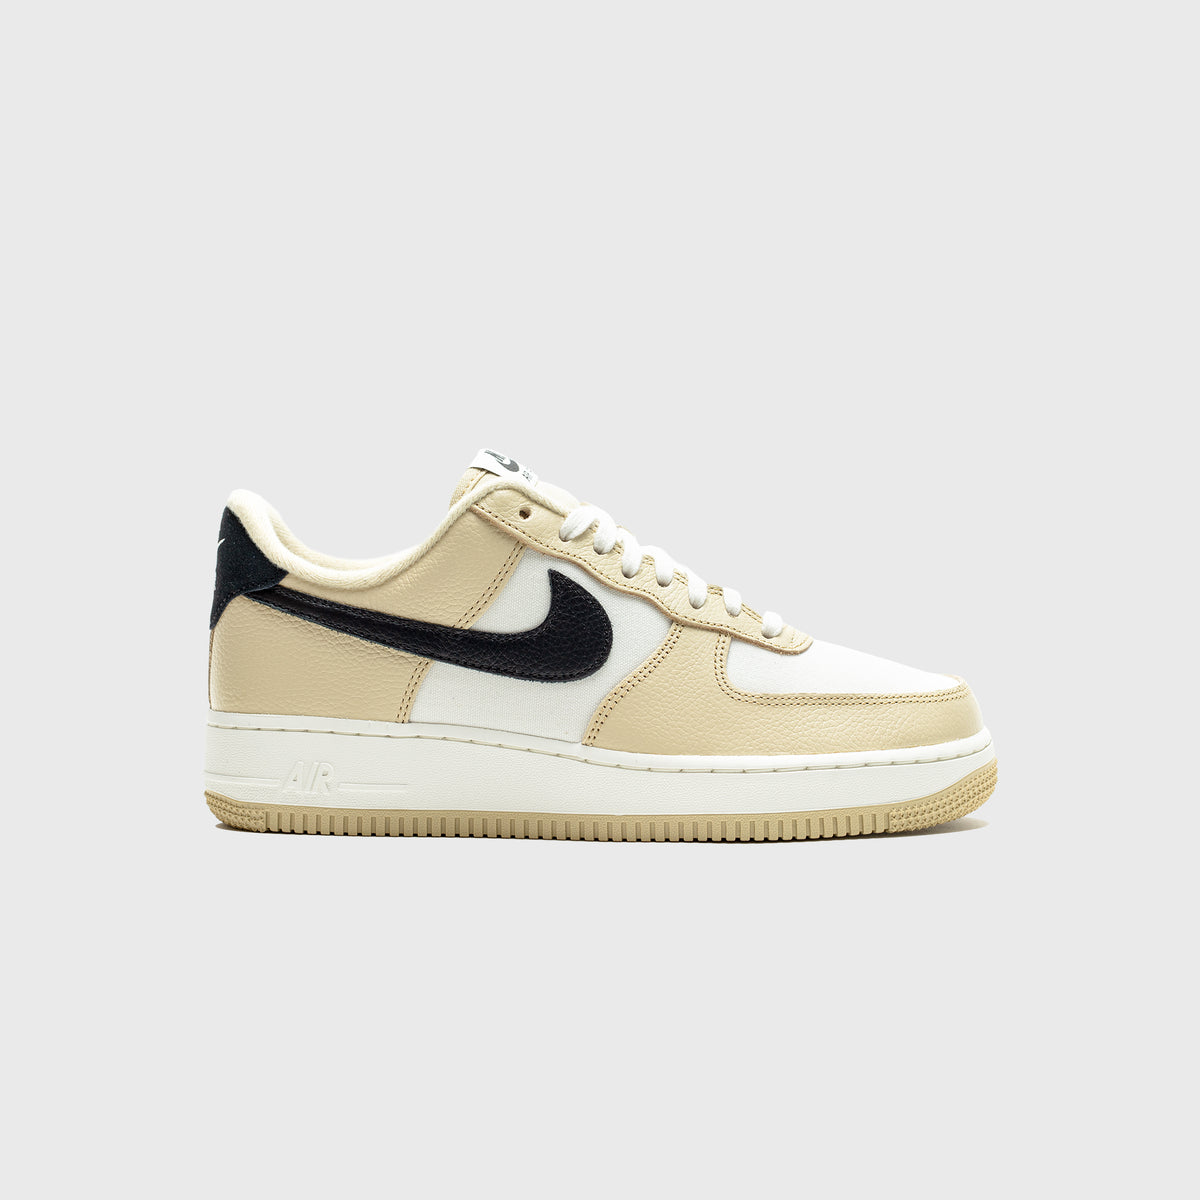 AIR FORCE 1 '07 LX TEAM GOLD – PACKER SHOES